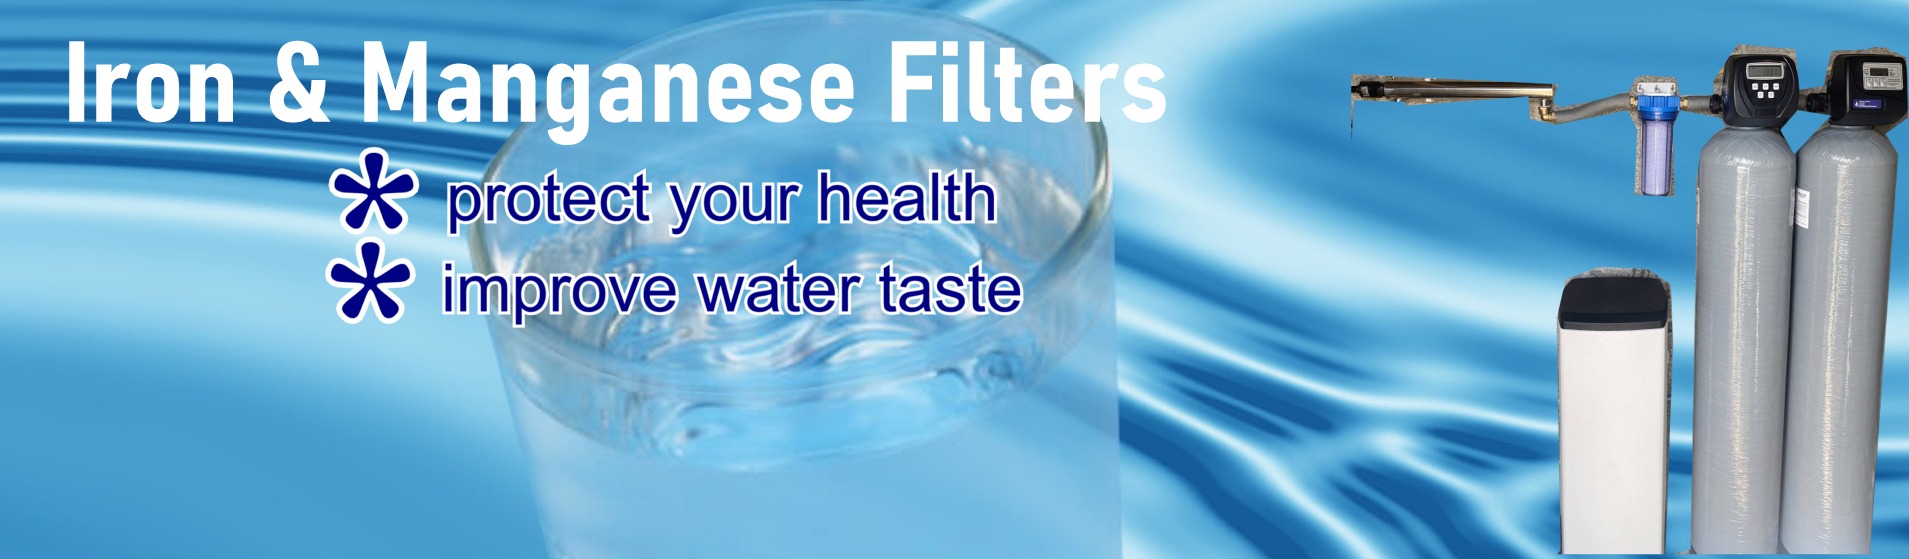 Iron and manganese filtration systems - Protect your health, improve water taste - Direct Water Treatment, Co. Kilkenny, Ireland